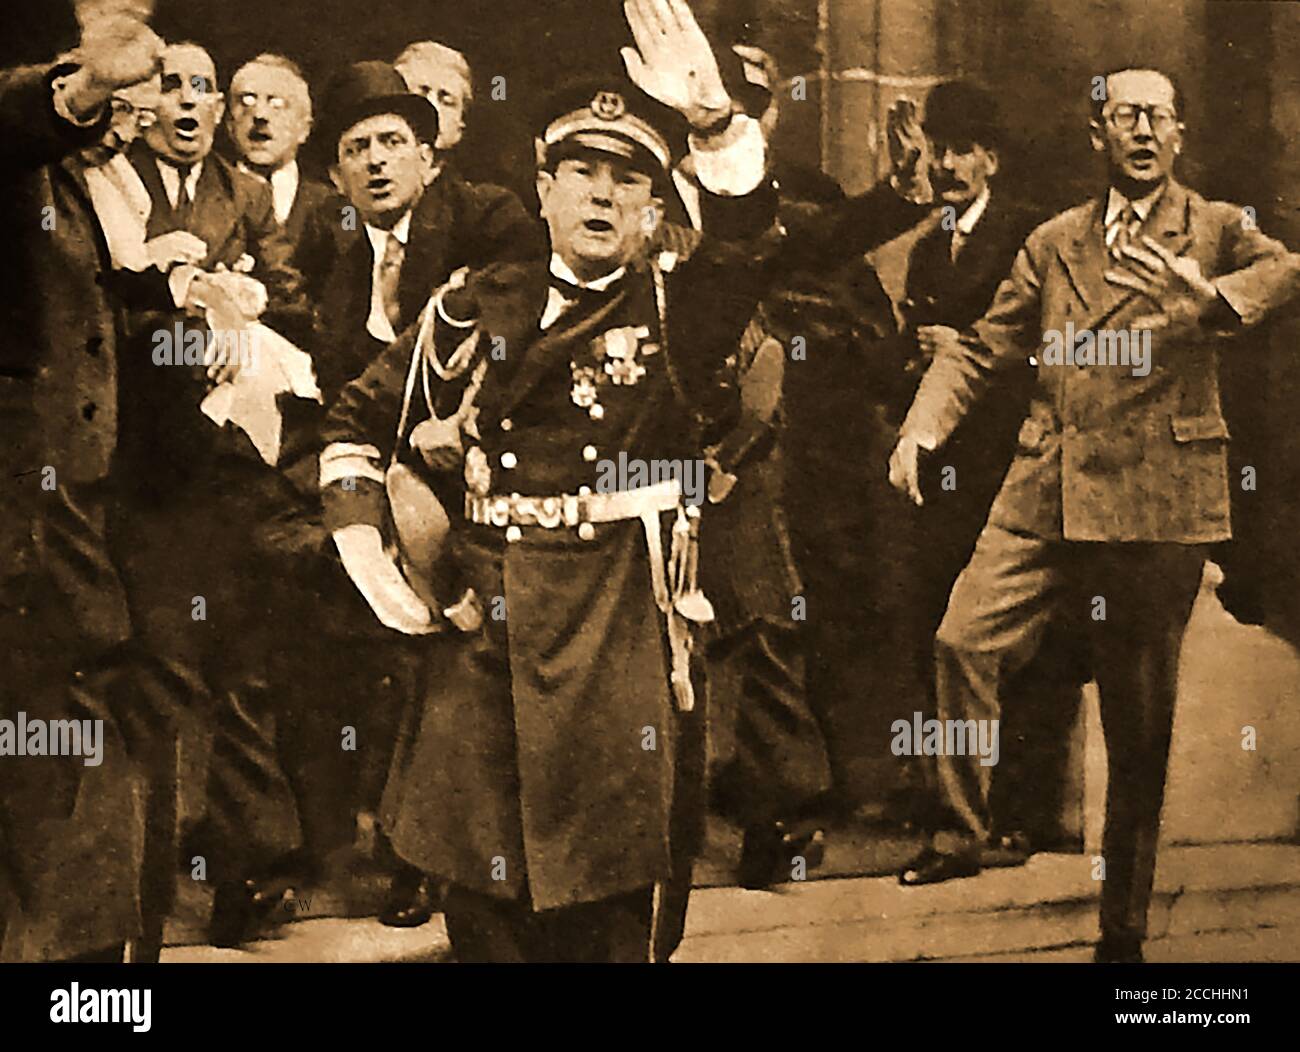 May 8th 1932 - Part of the official party react in horror at the assassination of the French President   by Dr   Paul Gorguloff, a mentally unstable Russian immigrant . --- Joseph Athanase Doumer, commonly known as Paul Doumer (1857 – 1932), was the President of France from 13 June 1931 until his assassination in Paris. He was visiting Paris for the opening of a book fair at the Hotel Salomon de Rothschild. He is the only French president to die of a gunshot wound. Stock Photo